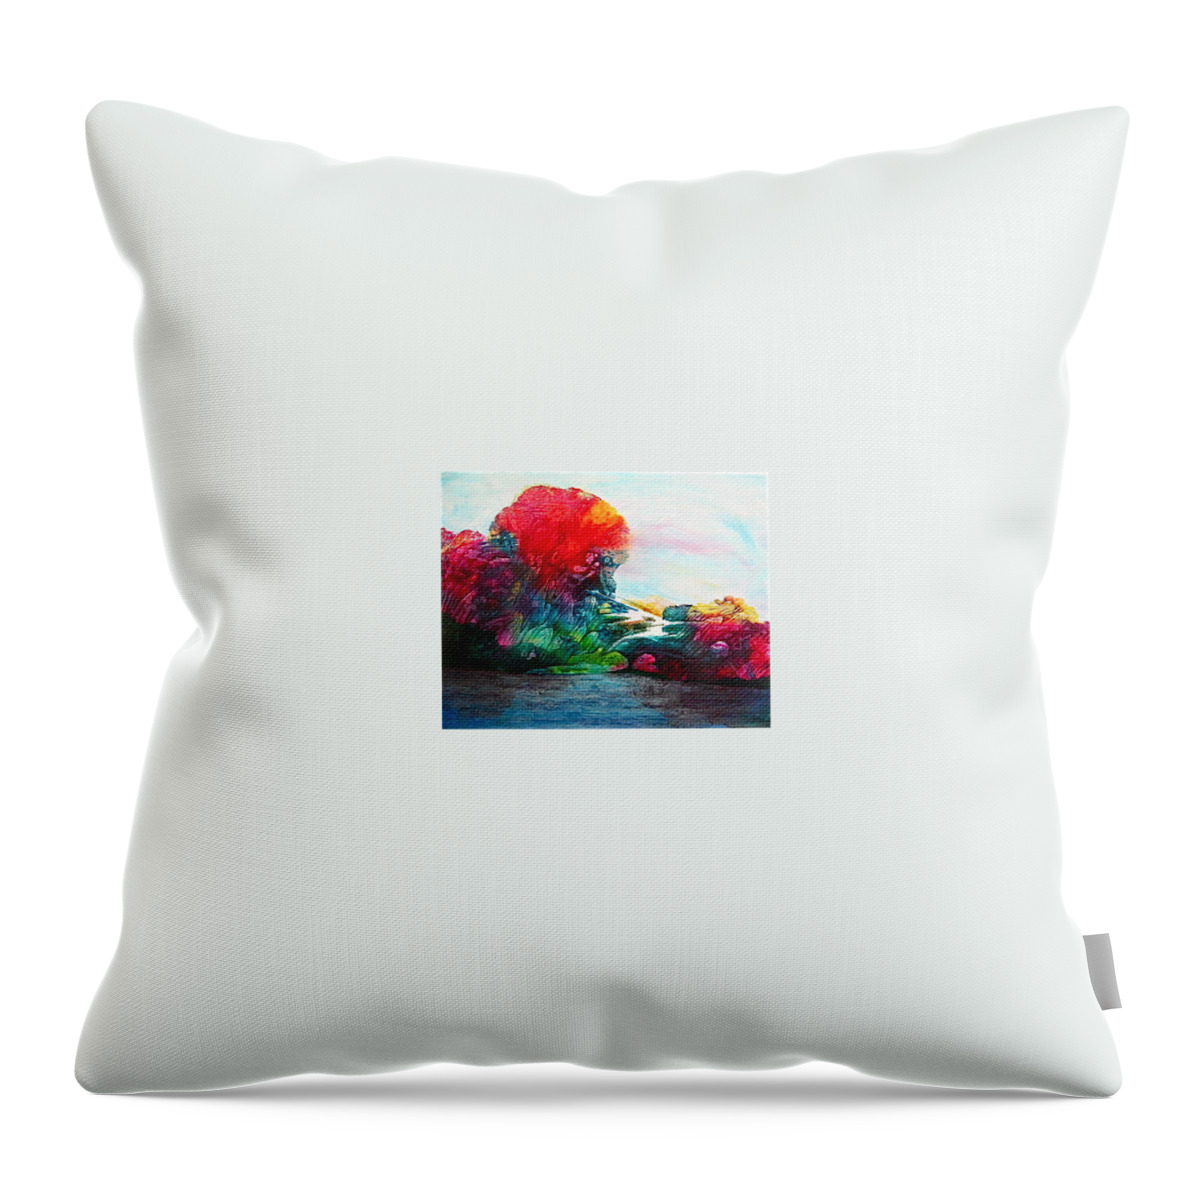 Landscape Throw Pillow featuring the painting Flow by Janice Nabors Raiteri